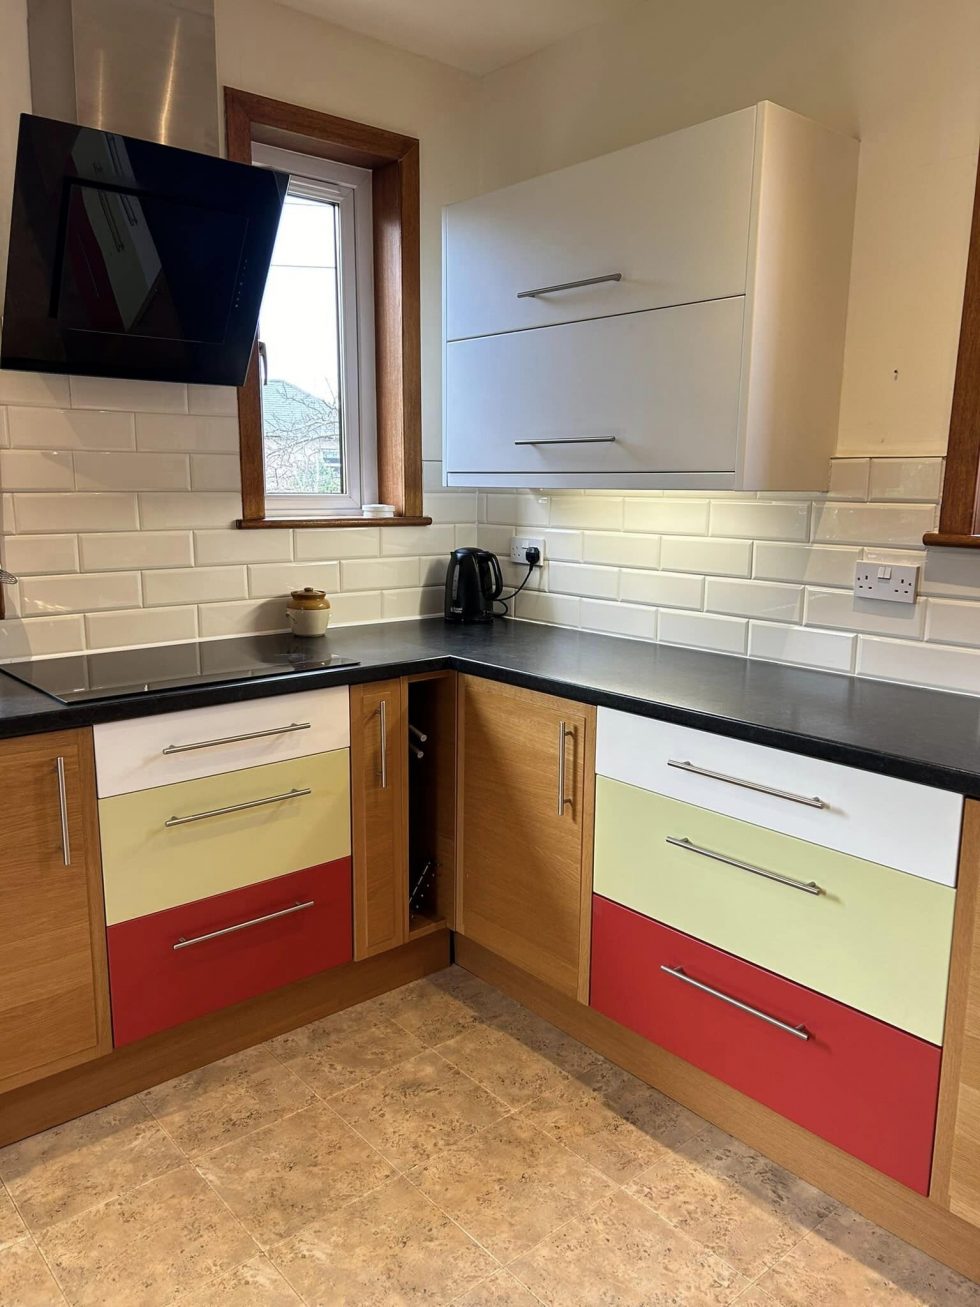 Hand painted kitchen with units in white, cream and red